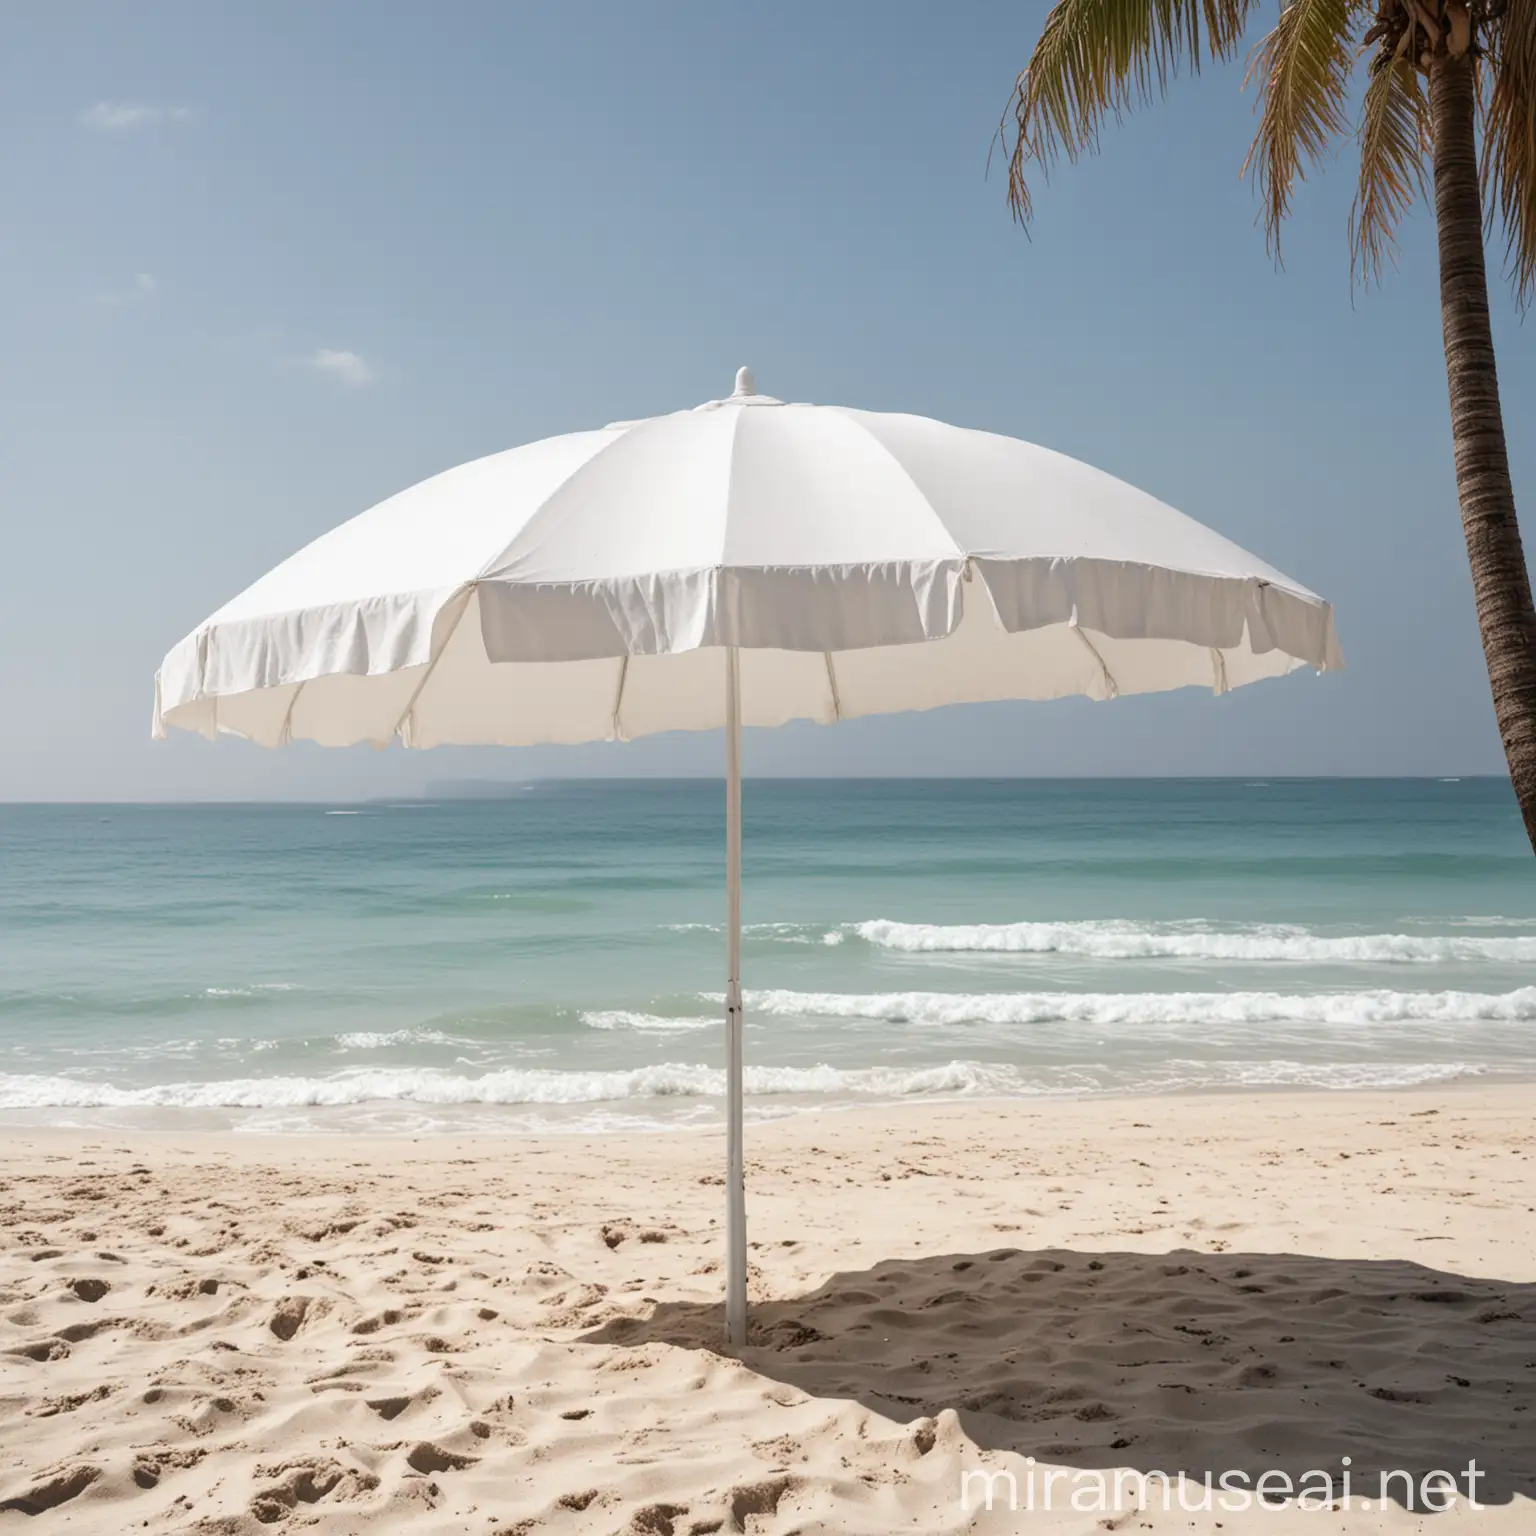 Soothing White Beach Umbrella Tranquil Side View